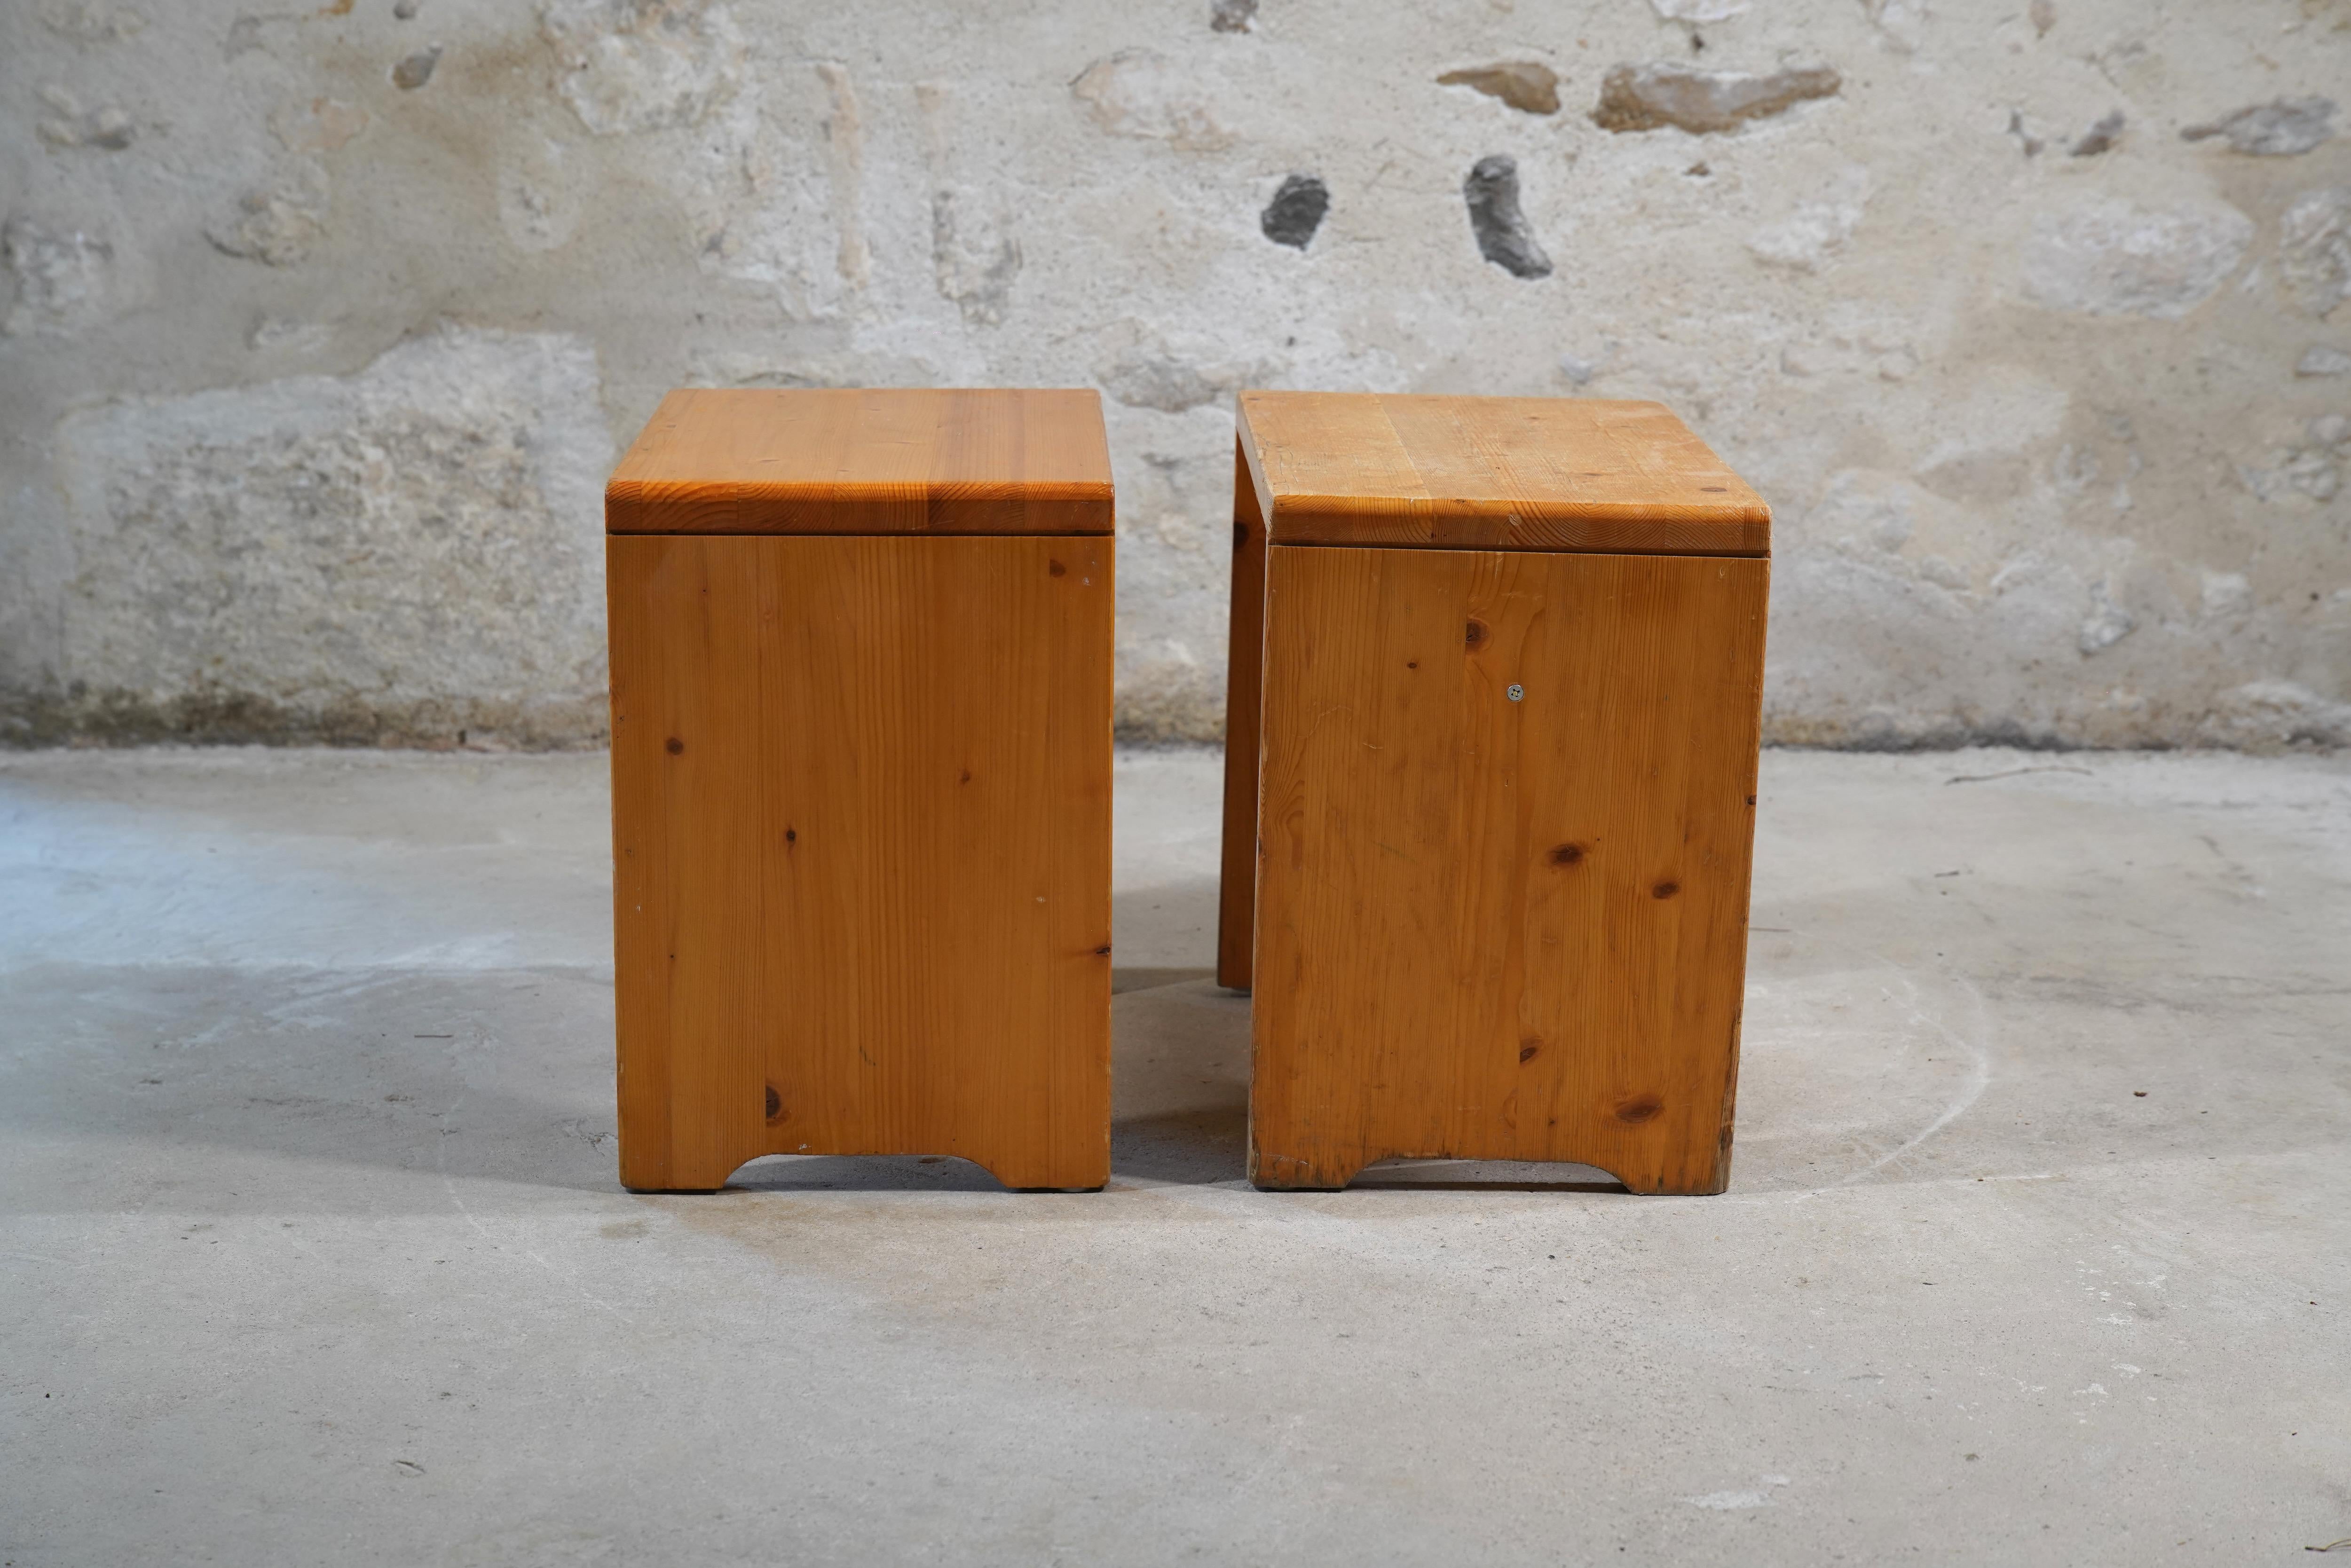 Charlotte Perriand Stools from Les Arcs, France circa 1968 (4 Available) For Sale 12